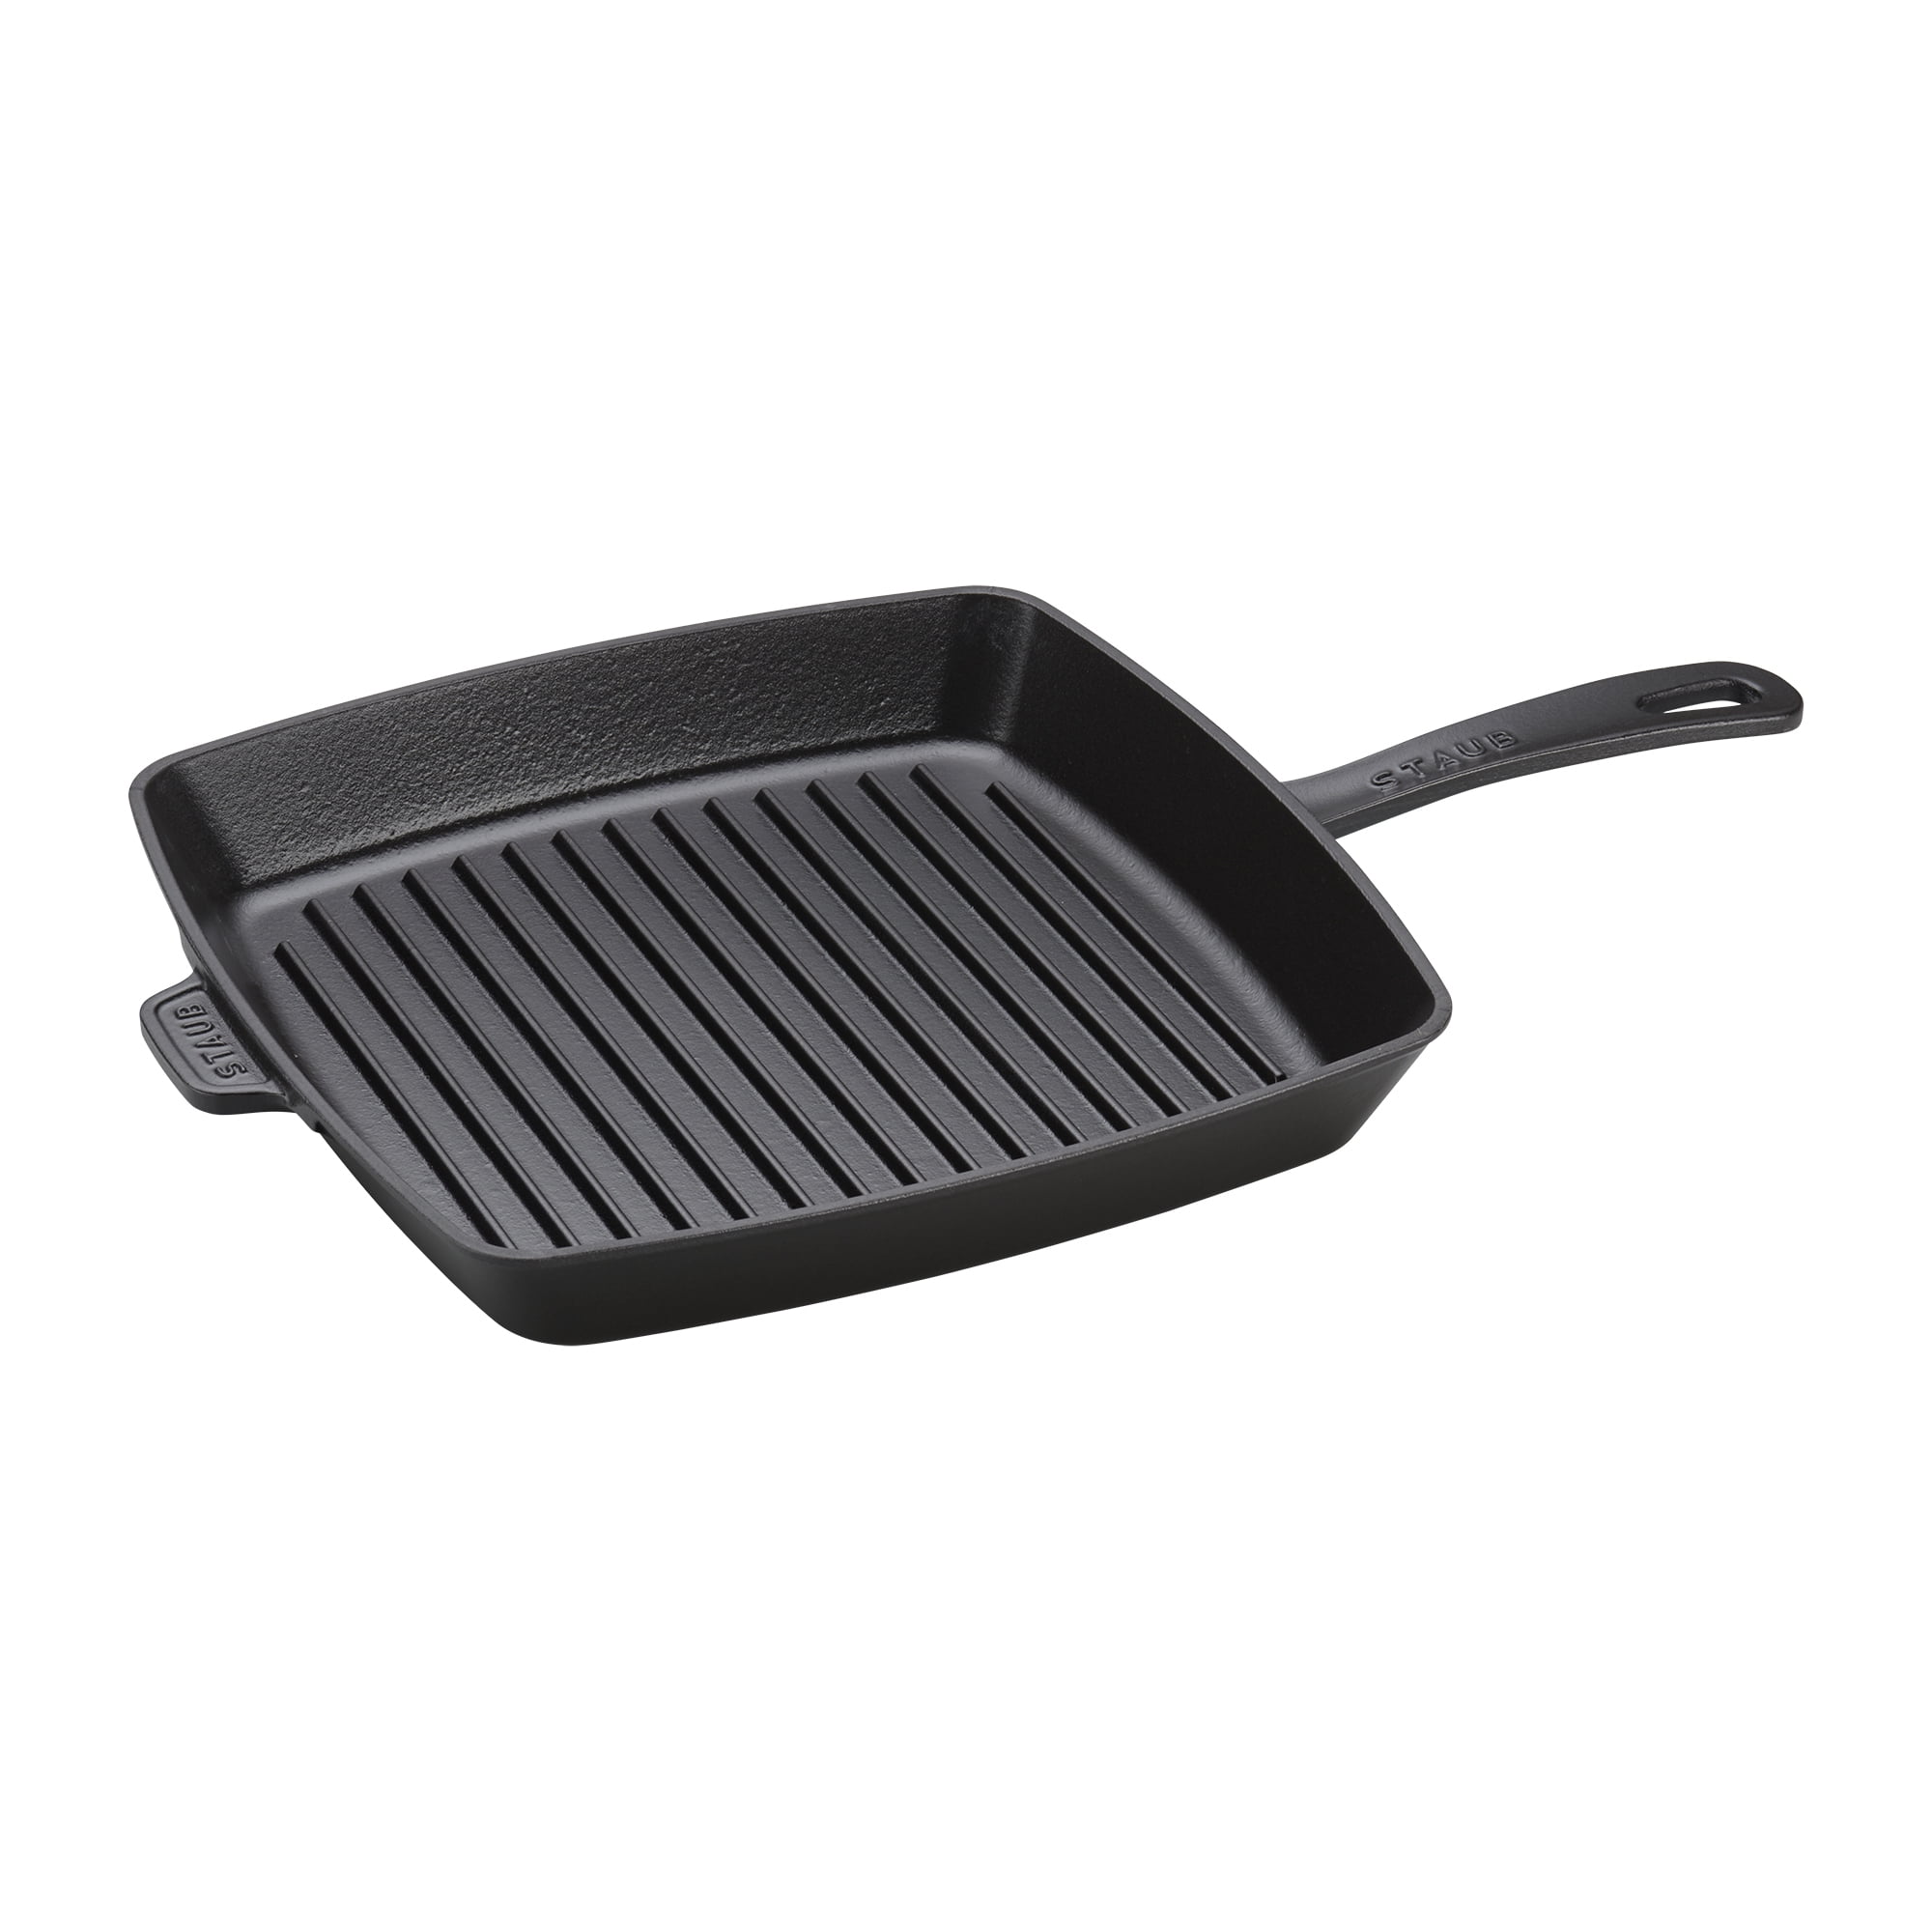 12-in Square Cast Iron Skillet, Cast Iron Cookware